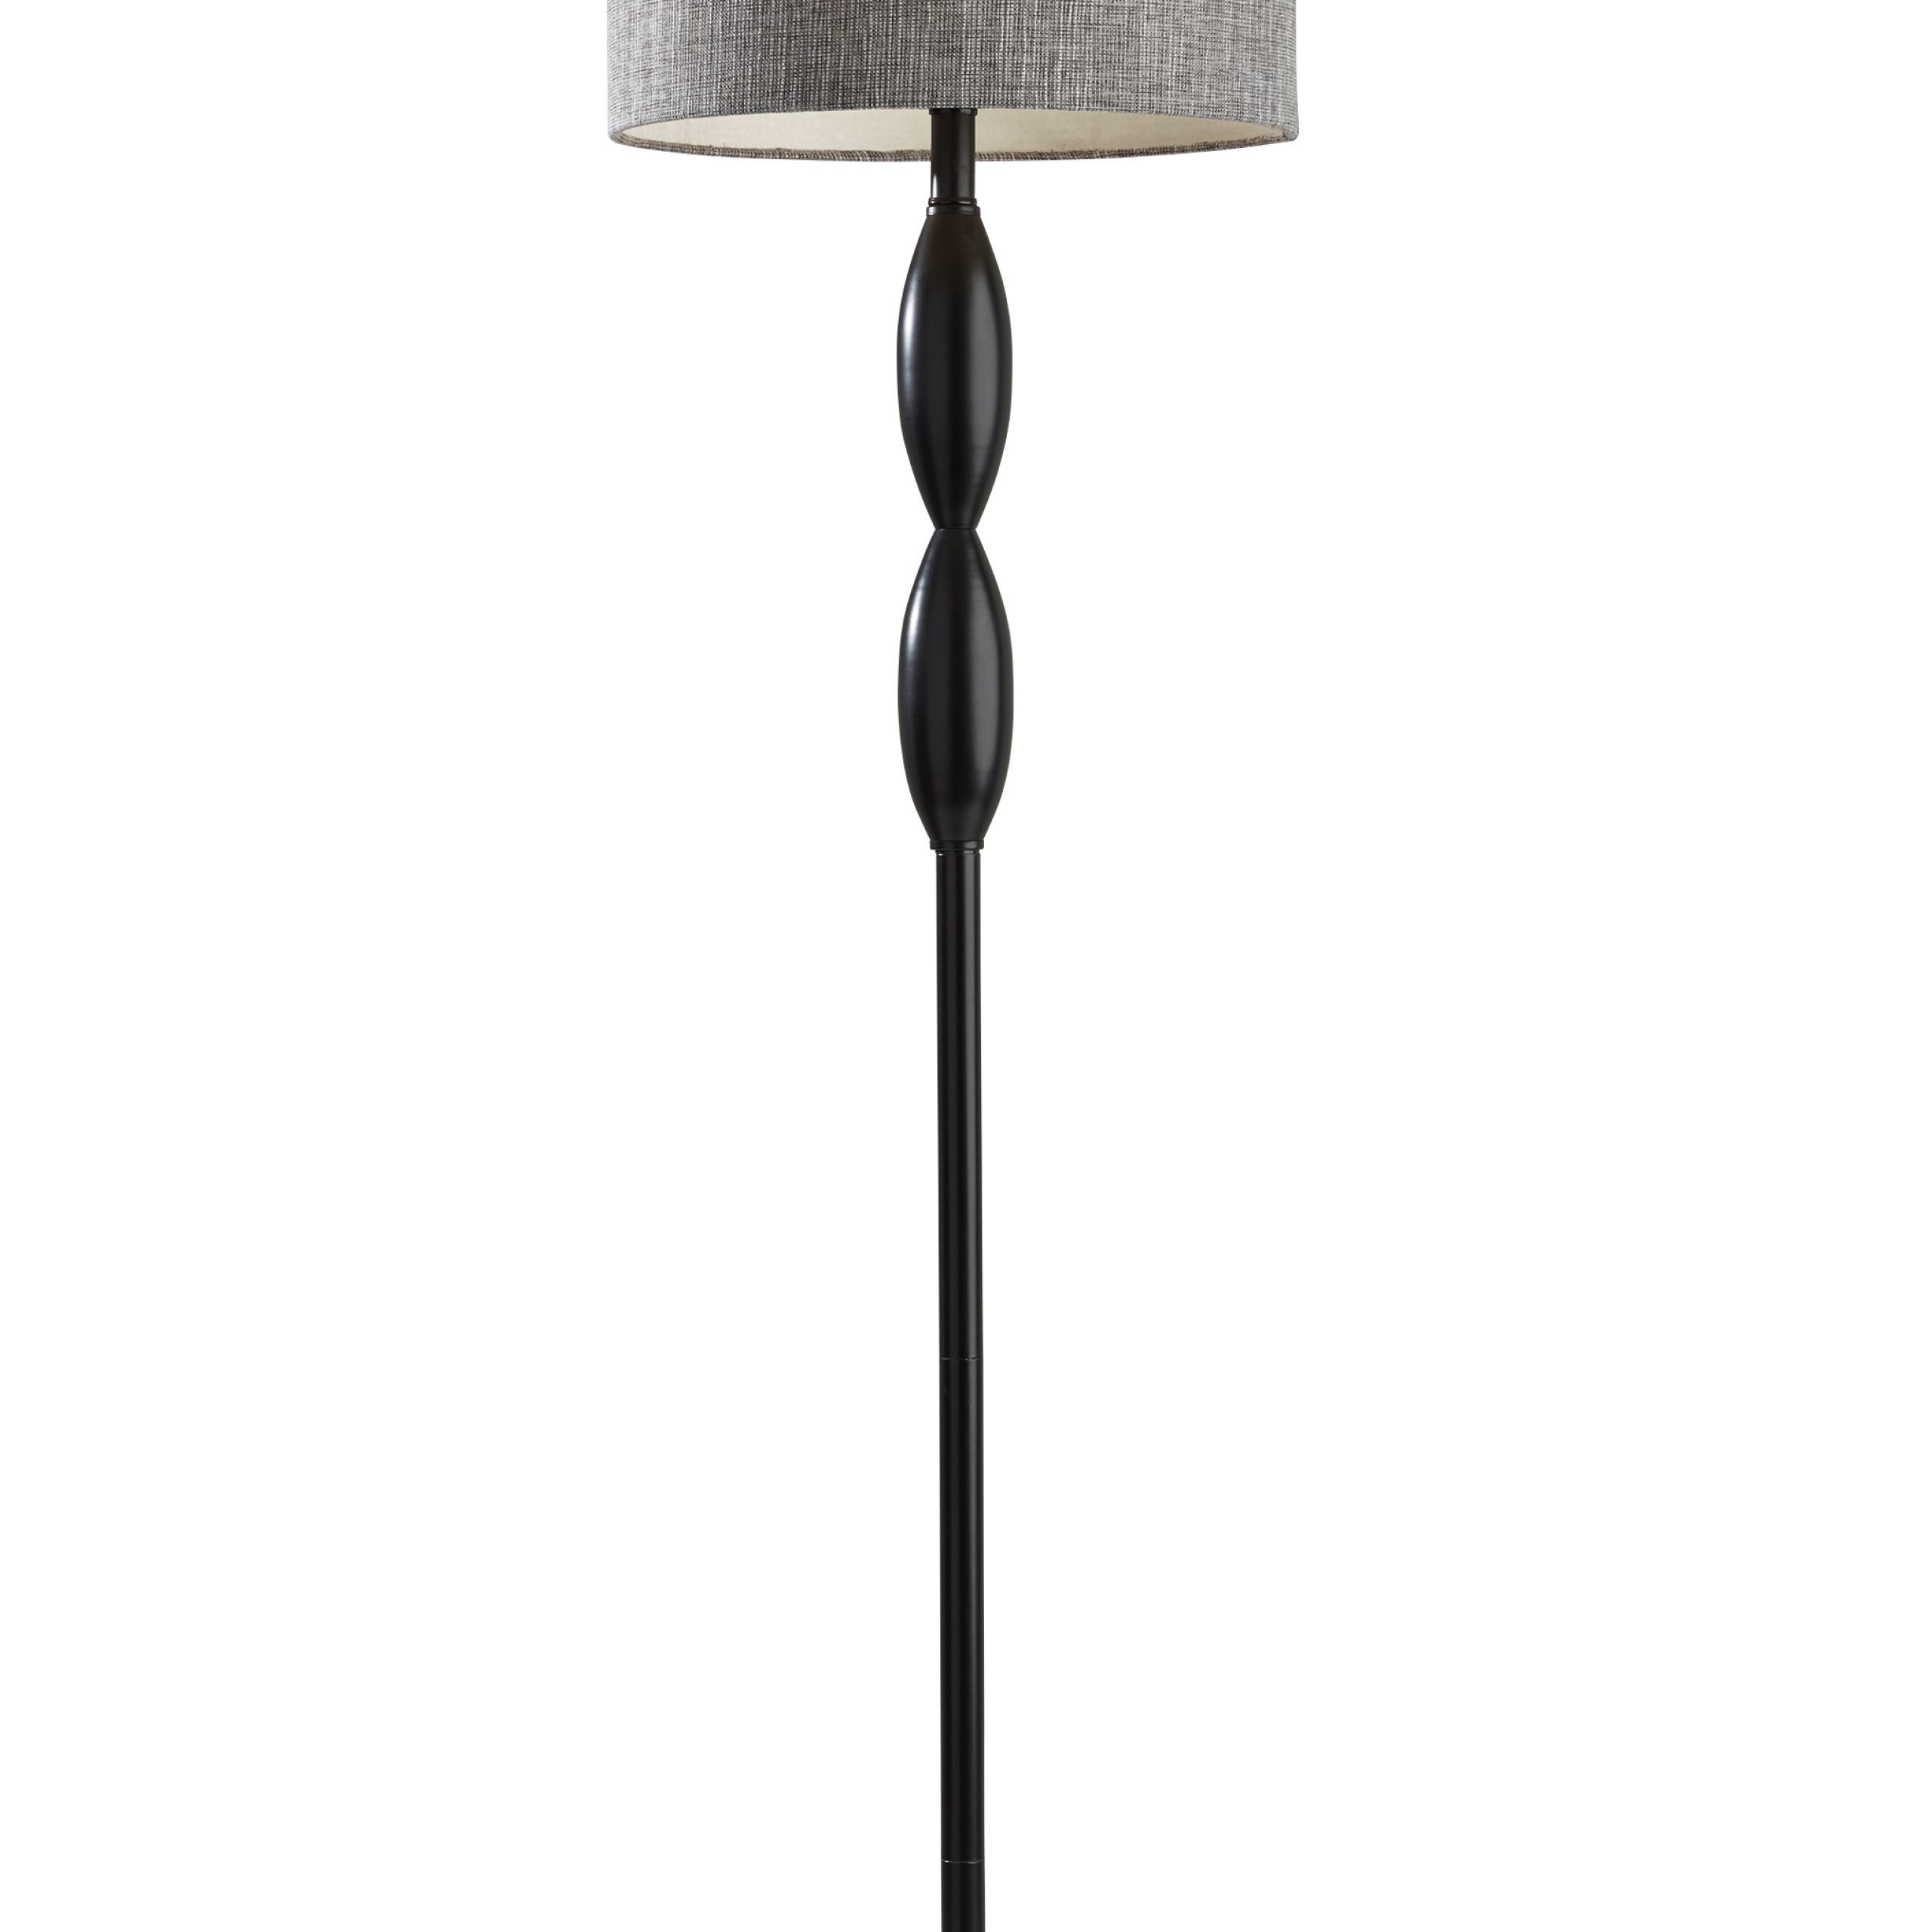 Adesso Lance Floor Lamp Black, Dark Grey And White Textured Fabric Shade –  Walmart In 2019 Grey Textured Floor Lamps (View 5 of 15)